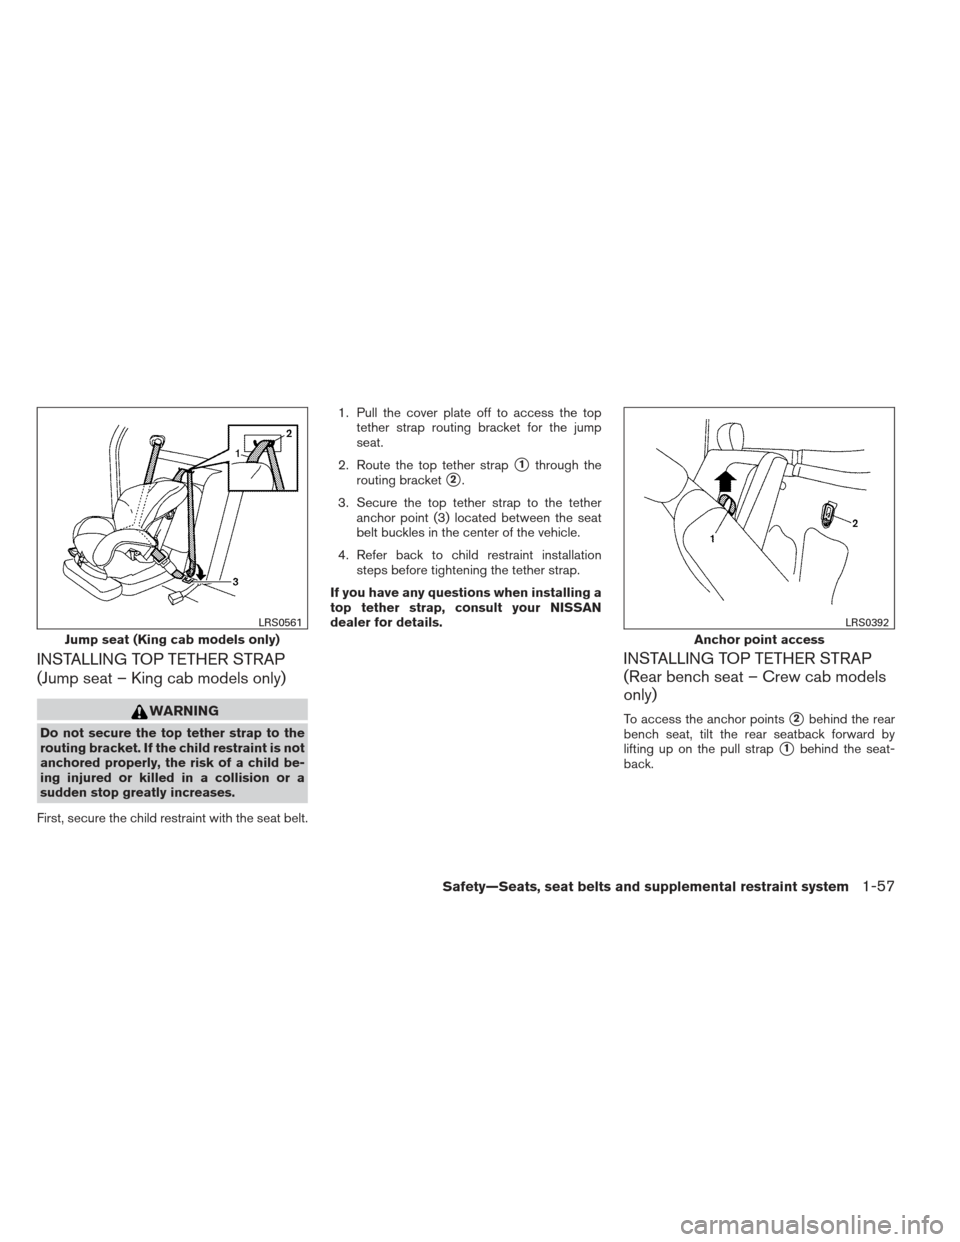 NISSAN FRONTIER 2013 D40 / 2.G Manual PDF INSTALLING TOP TETHER STRAP
(Jump seat – King cab models only)
WARNING
Do not secure the top tether strap to the
routing bracket. If the child restraint is not
anchored properly, the risk of a child